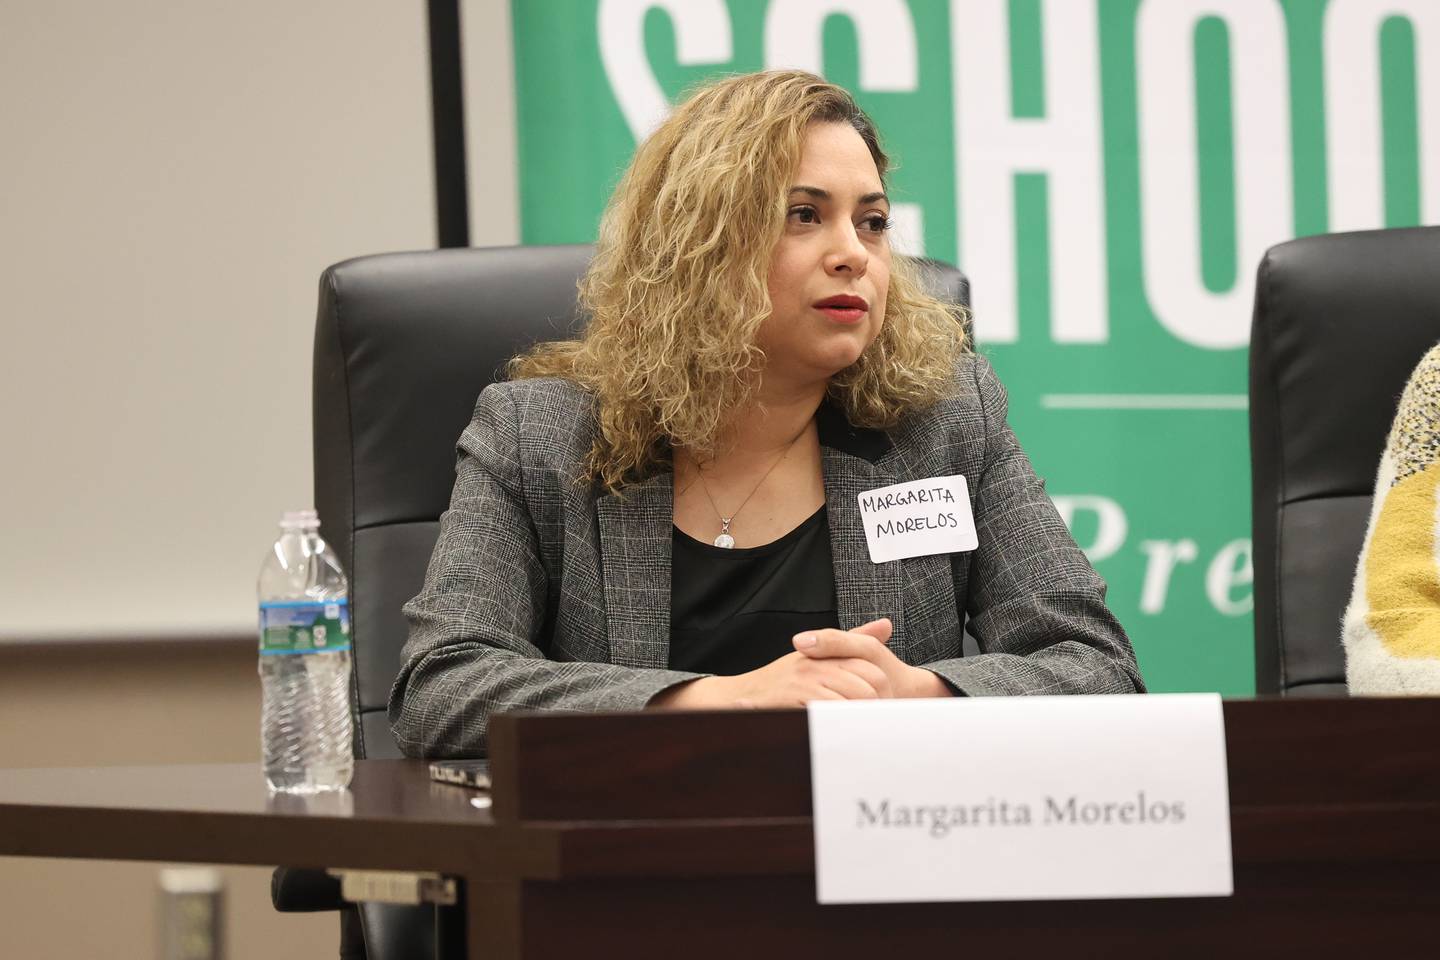 Candidate for Plainfield District 202 Board Margarita Morelos answers a question at a moderated forum for the candidates at the District 202 office on Thursday, March 16th, 2023 in Plainfield.